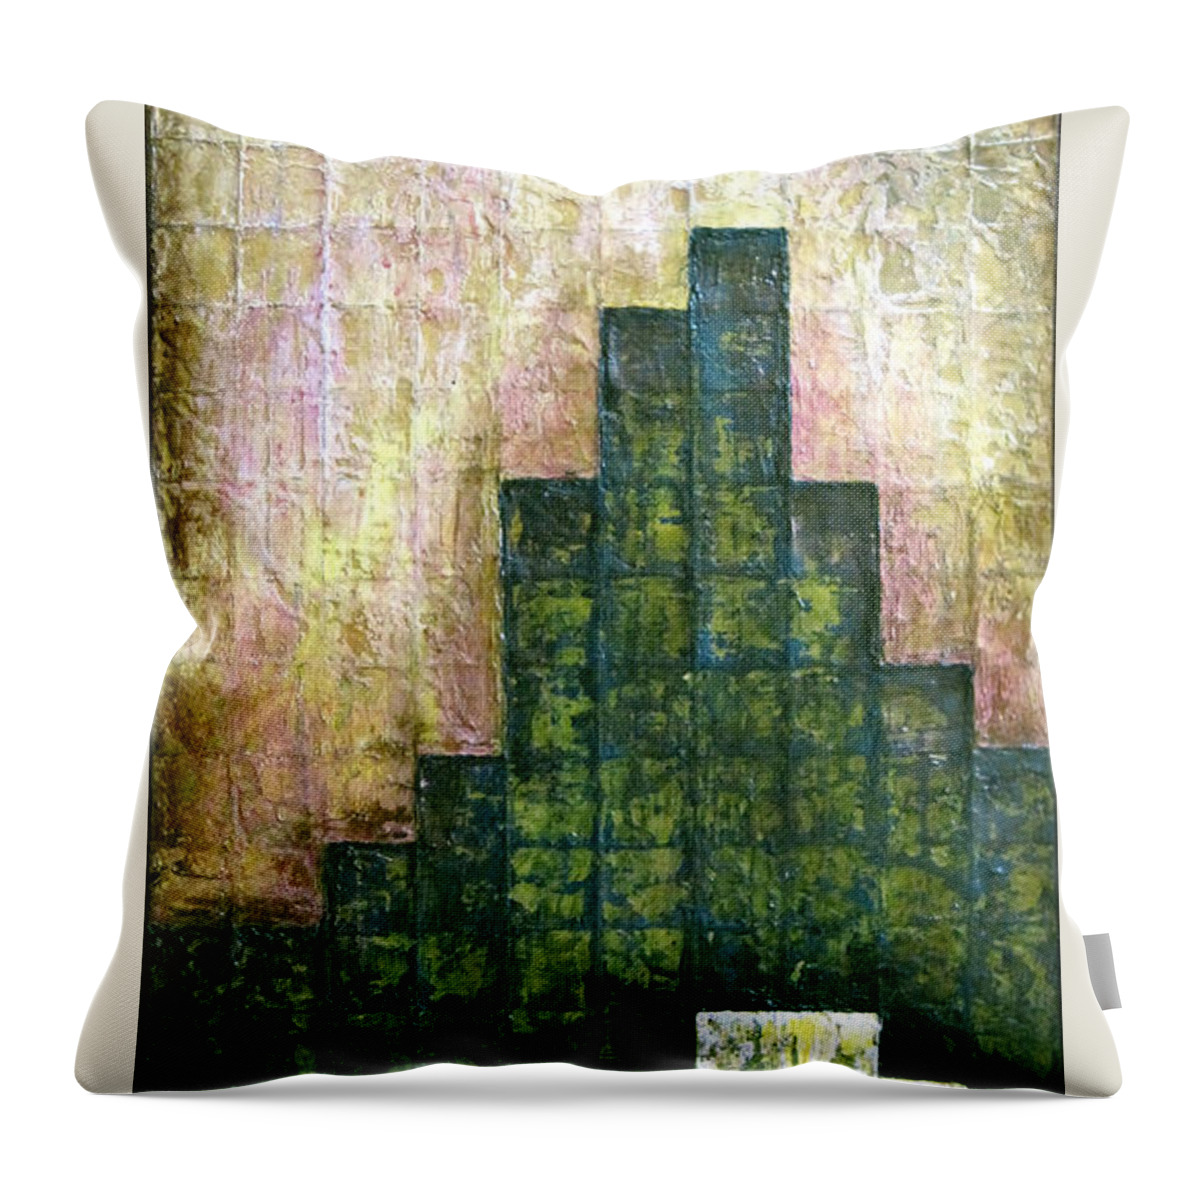 City Throw Pillow featuring the painting City In Green by Shadia Derbyshire